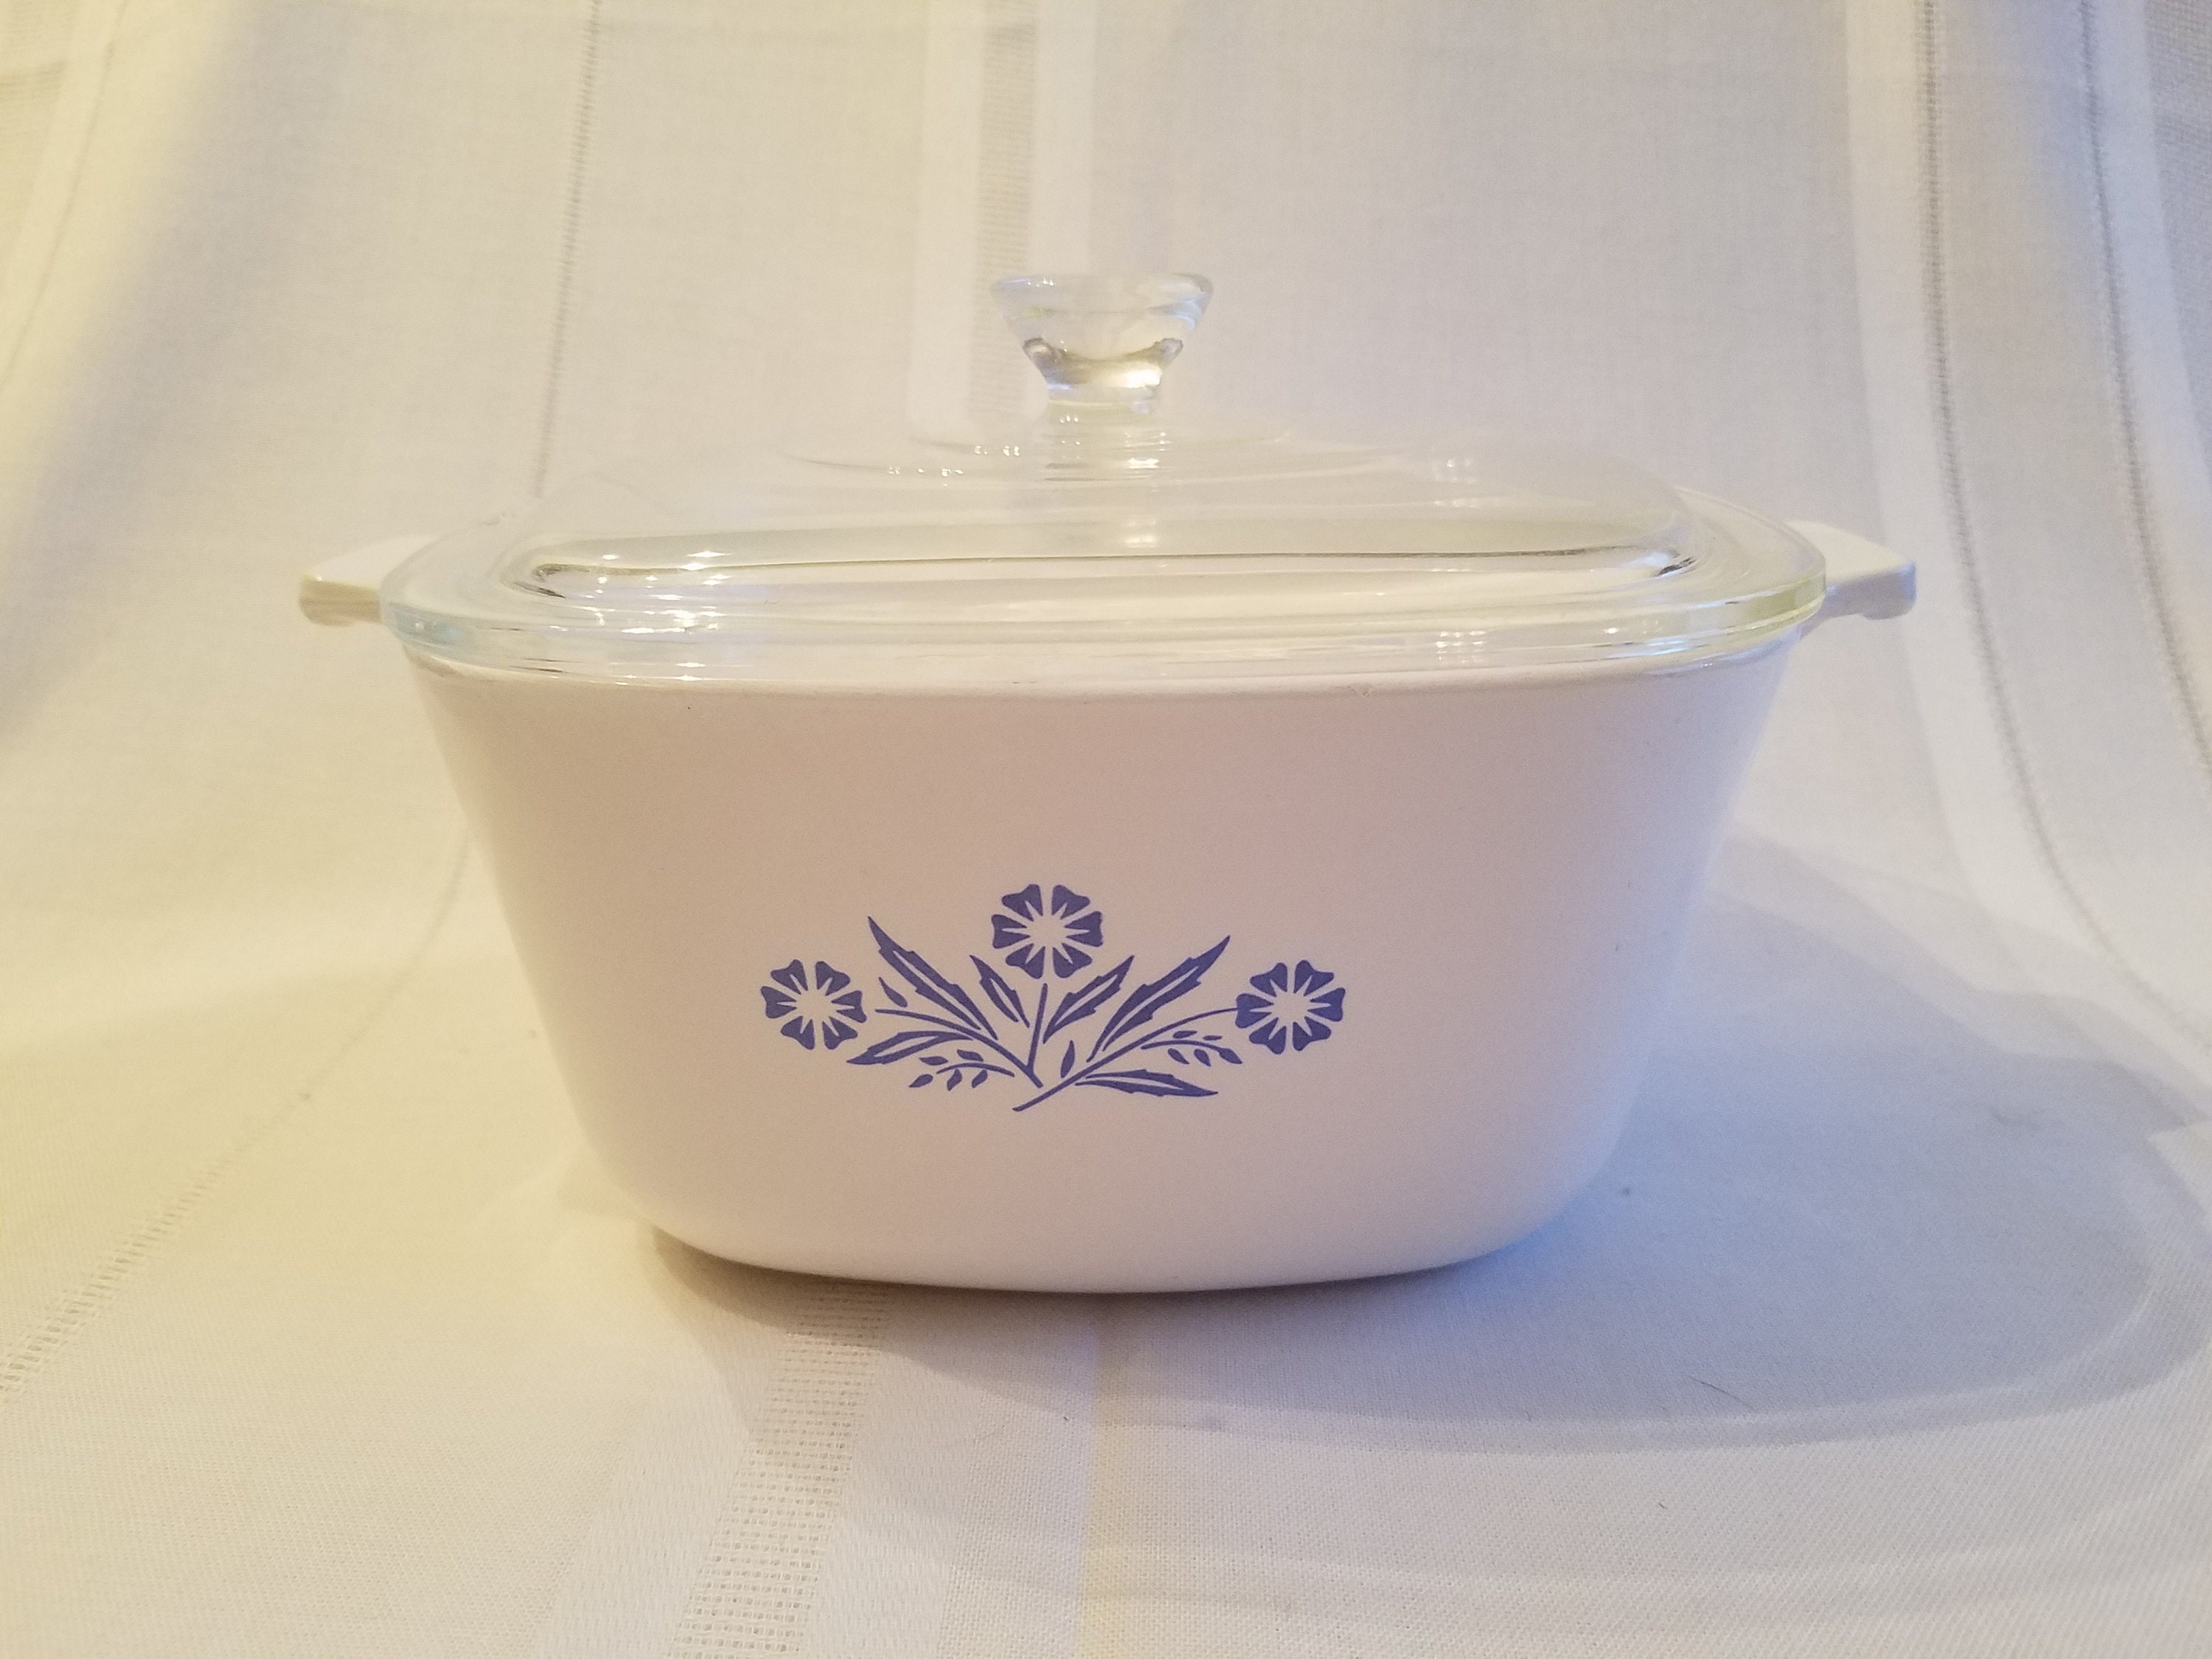 Cornflower Blue 3 Quart Square Casserole with Lid by Corning